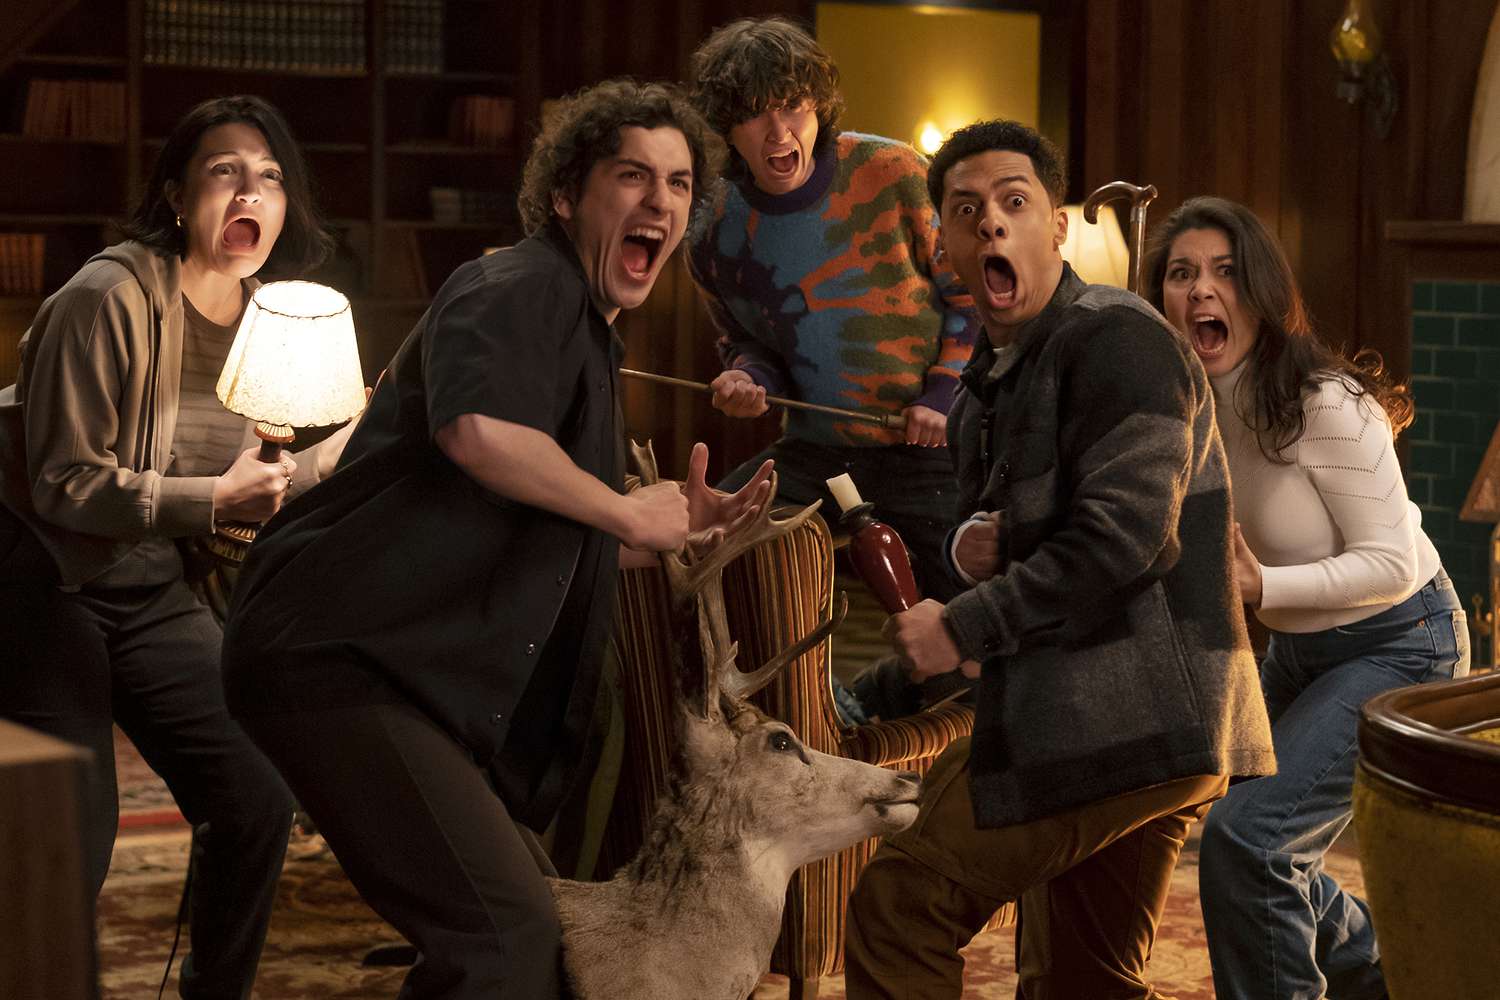 Isa Briones, Will Price, Miles McKenna, Zack Morris, and Ana Yi Puig on 'Goosebumps'